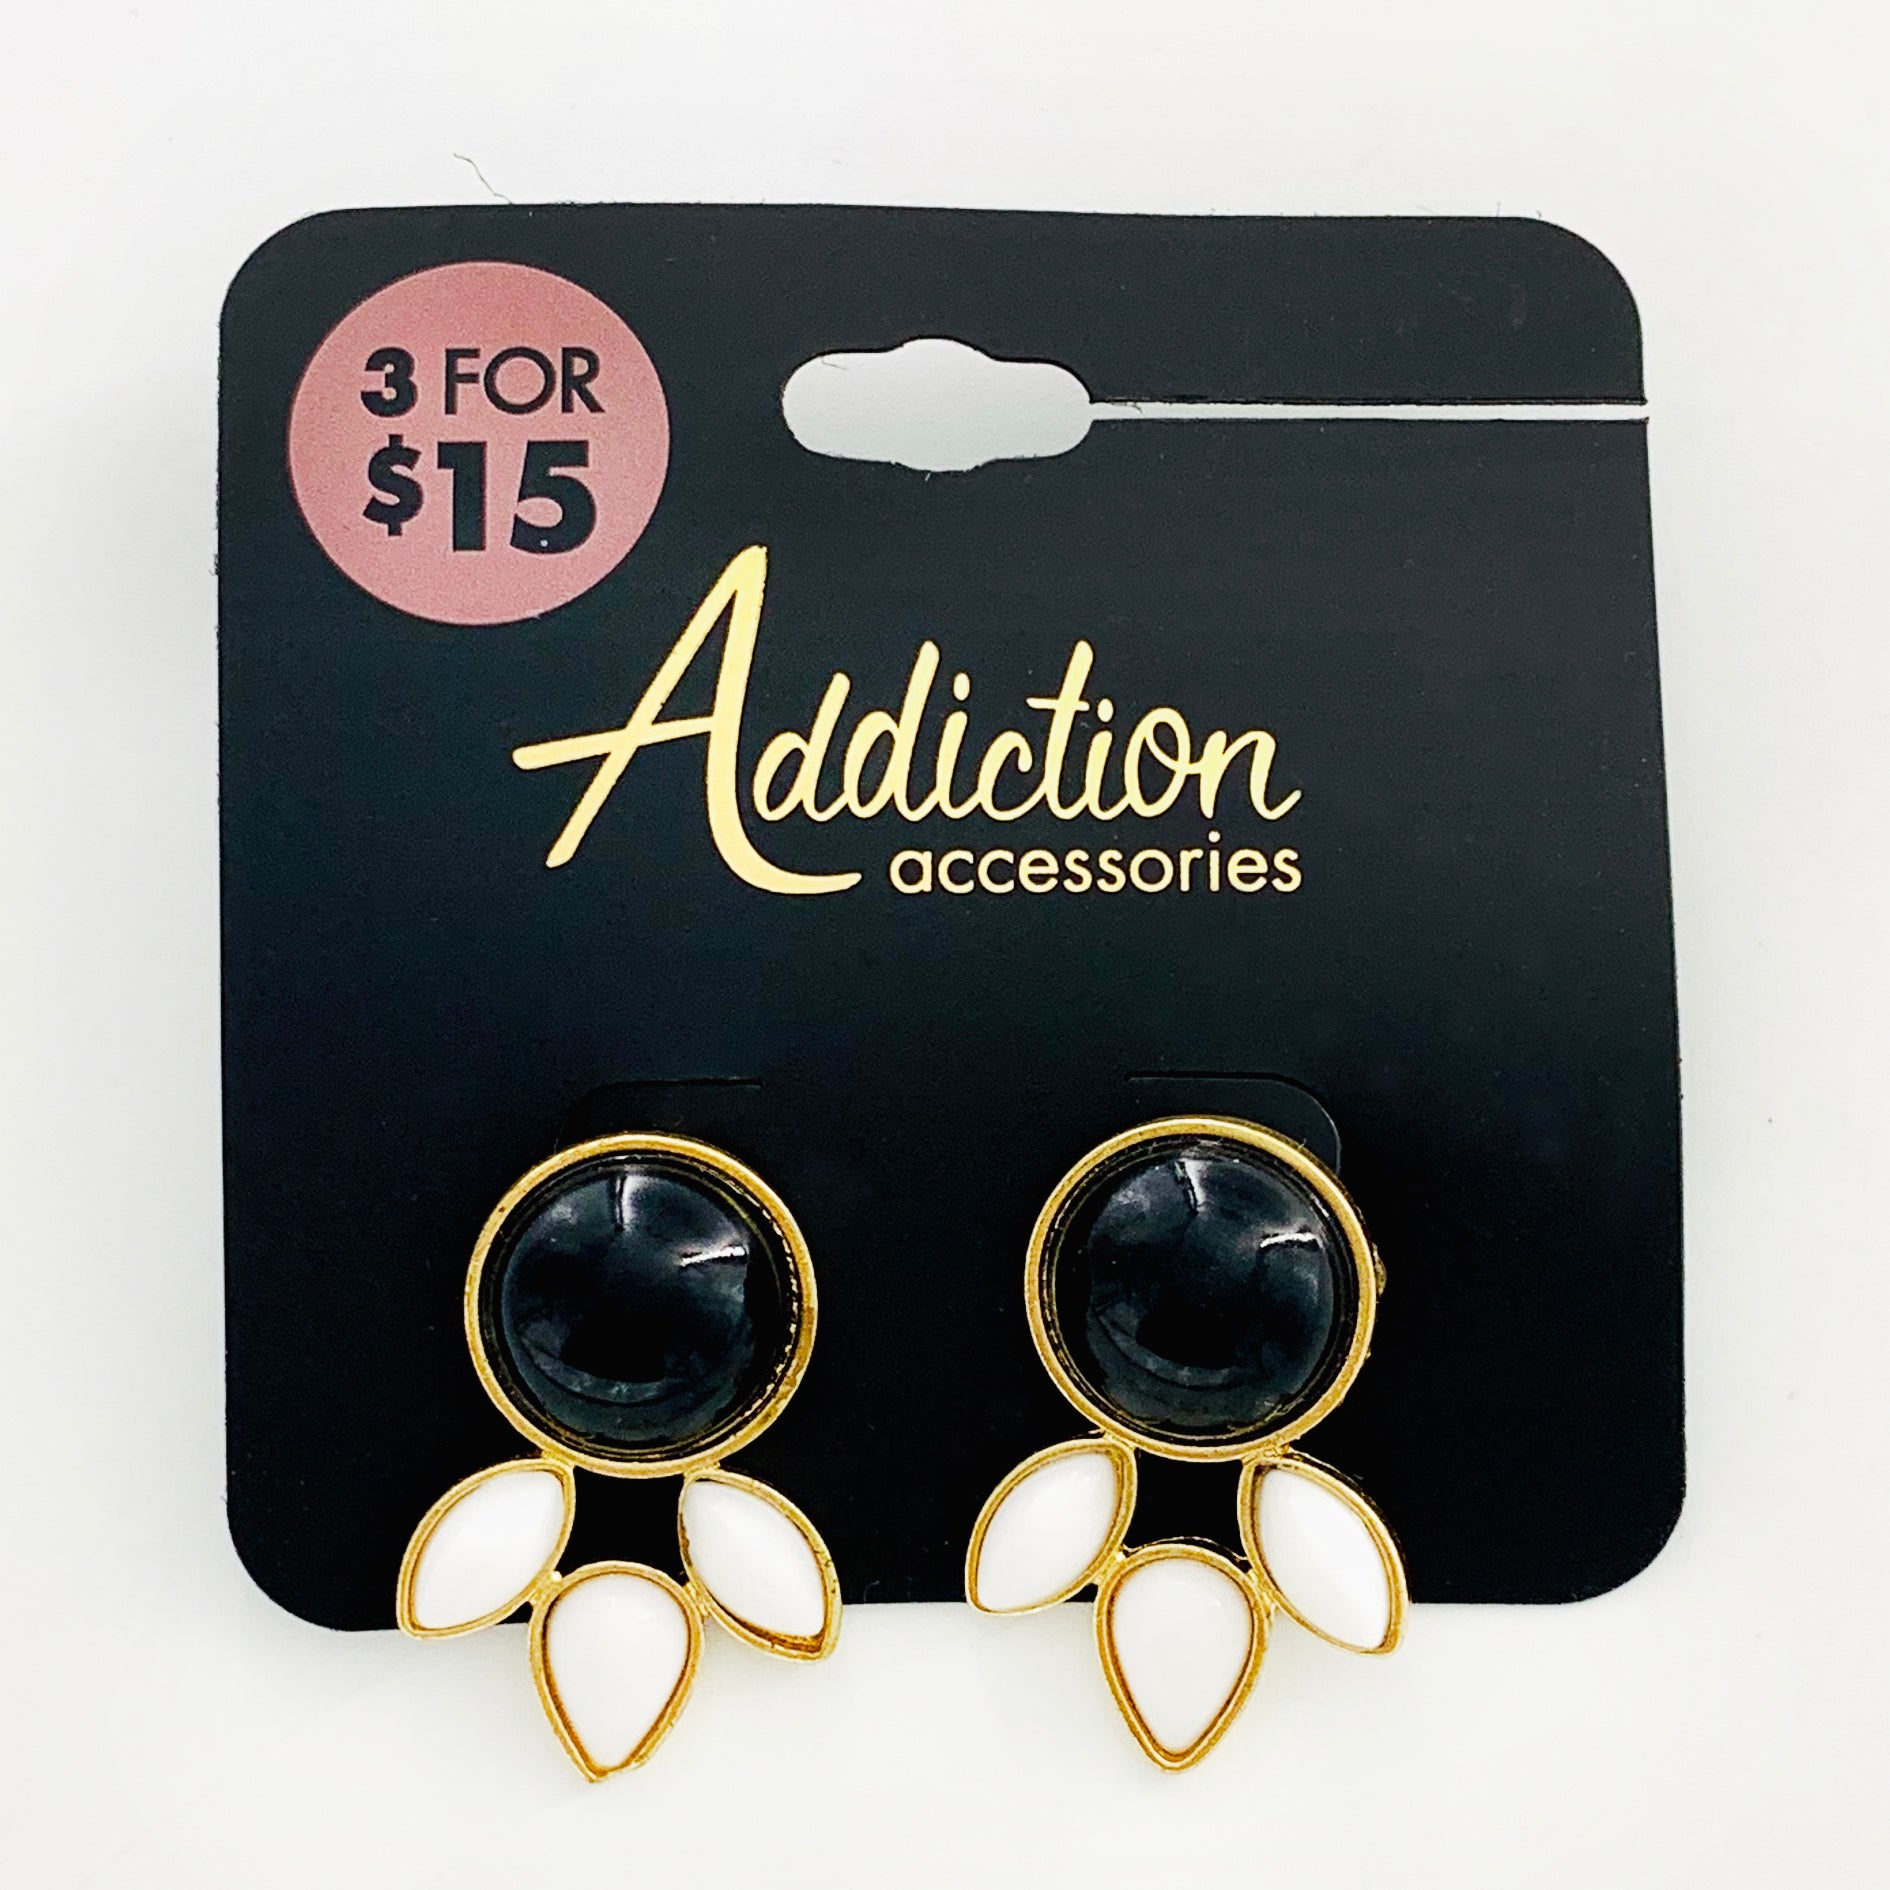 Gold earrings with black and white beads